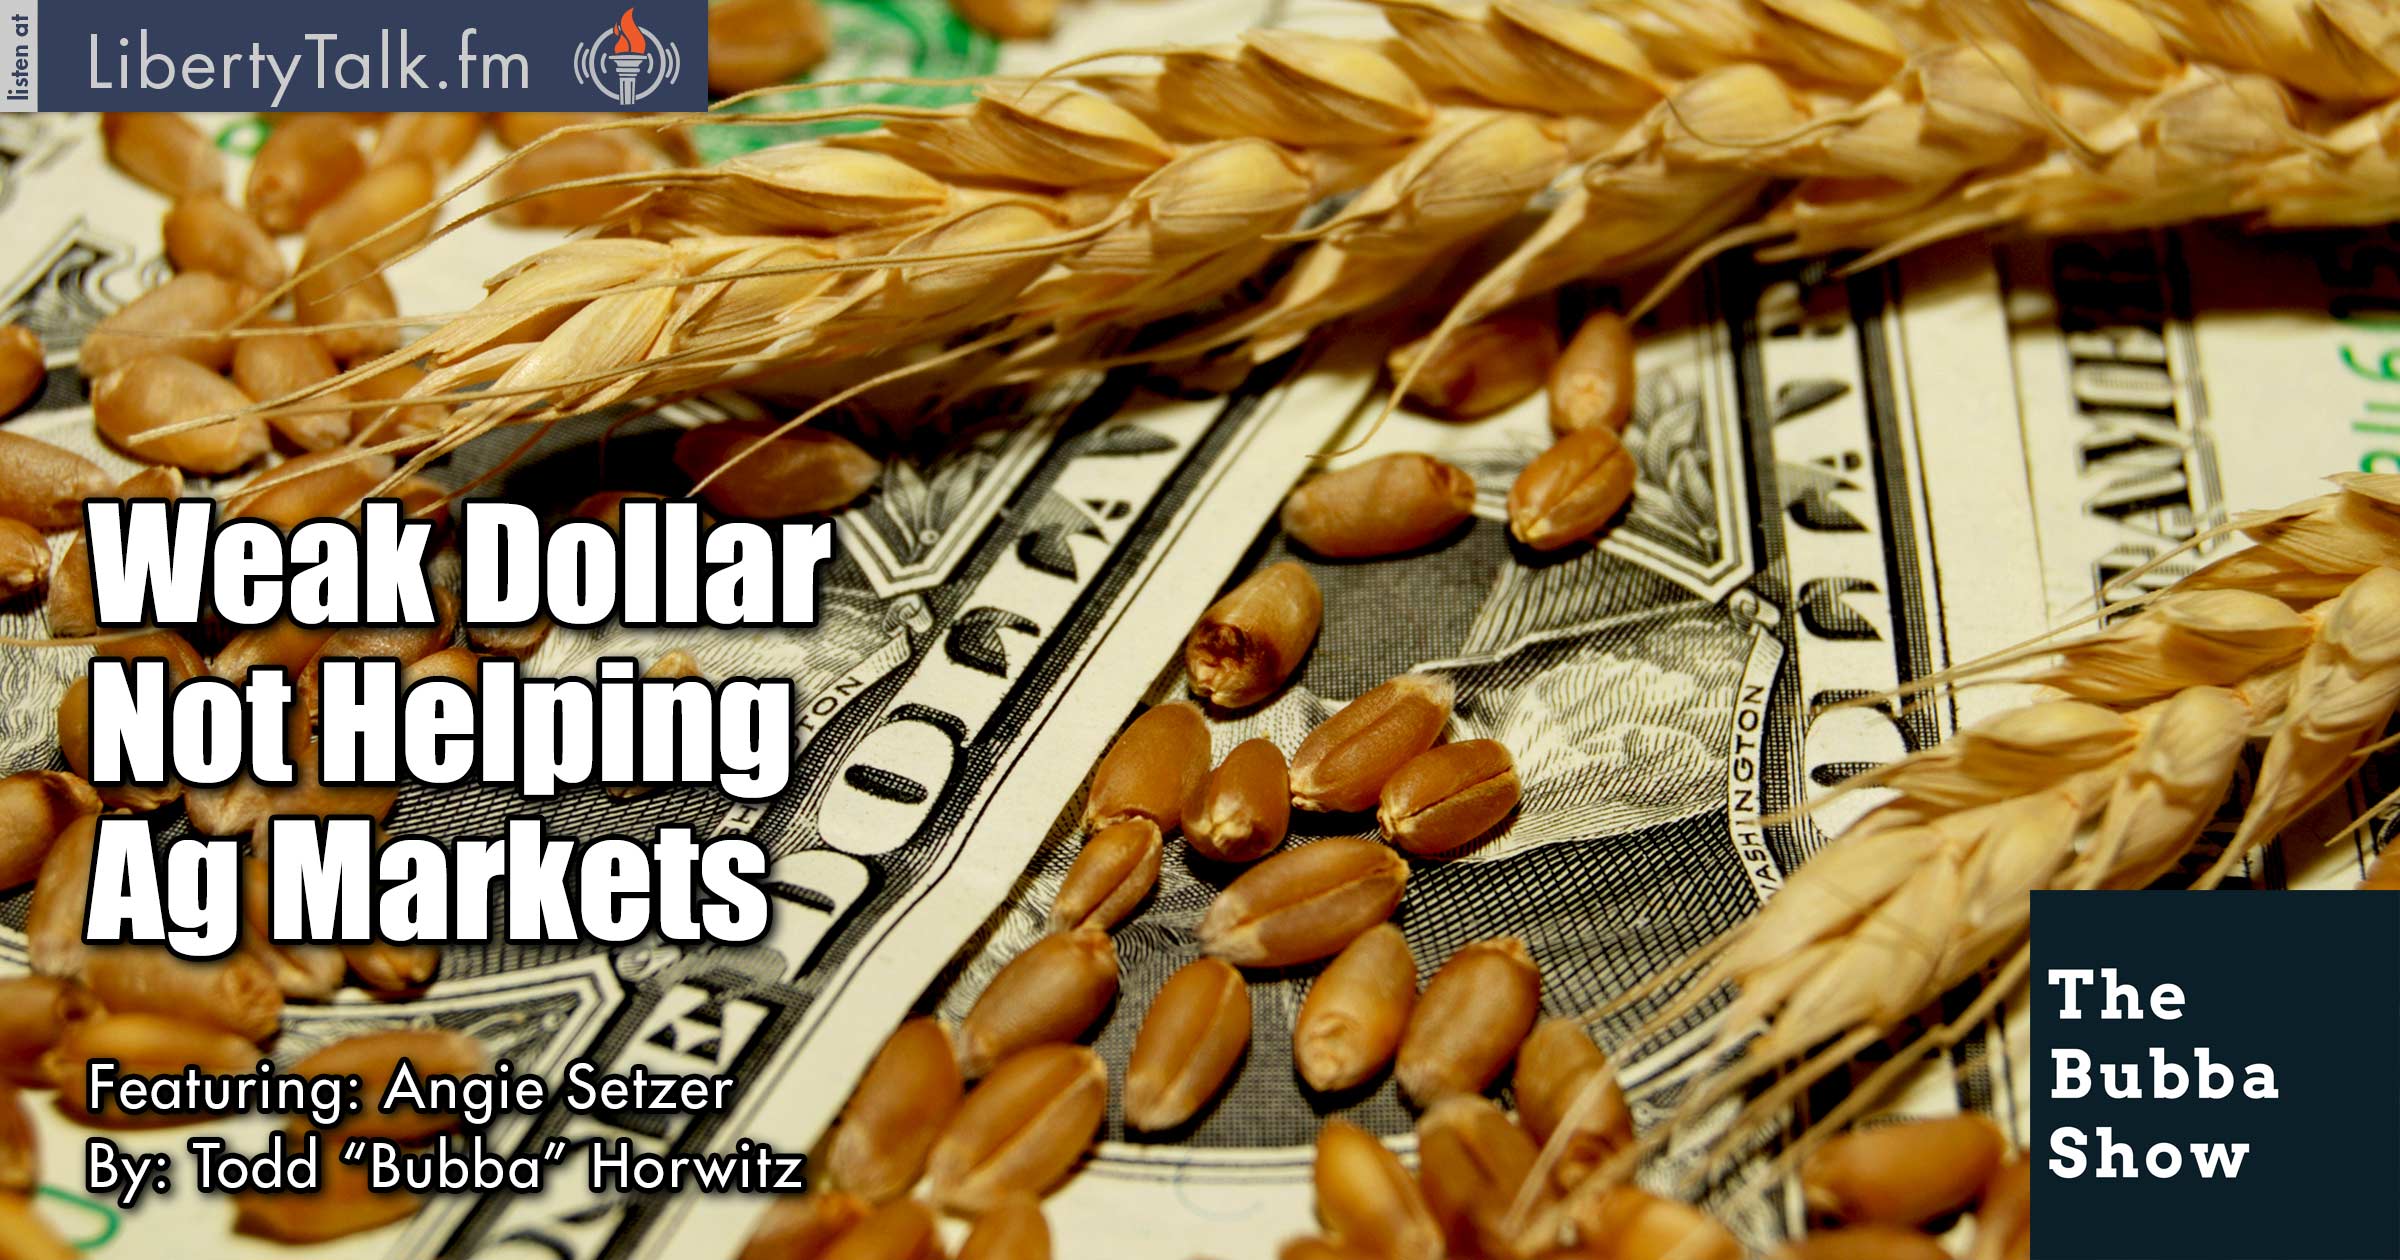 Weak Dollar Not Helping Ag Markets - The Bubba Show